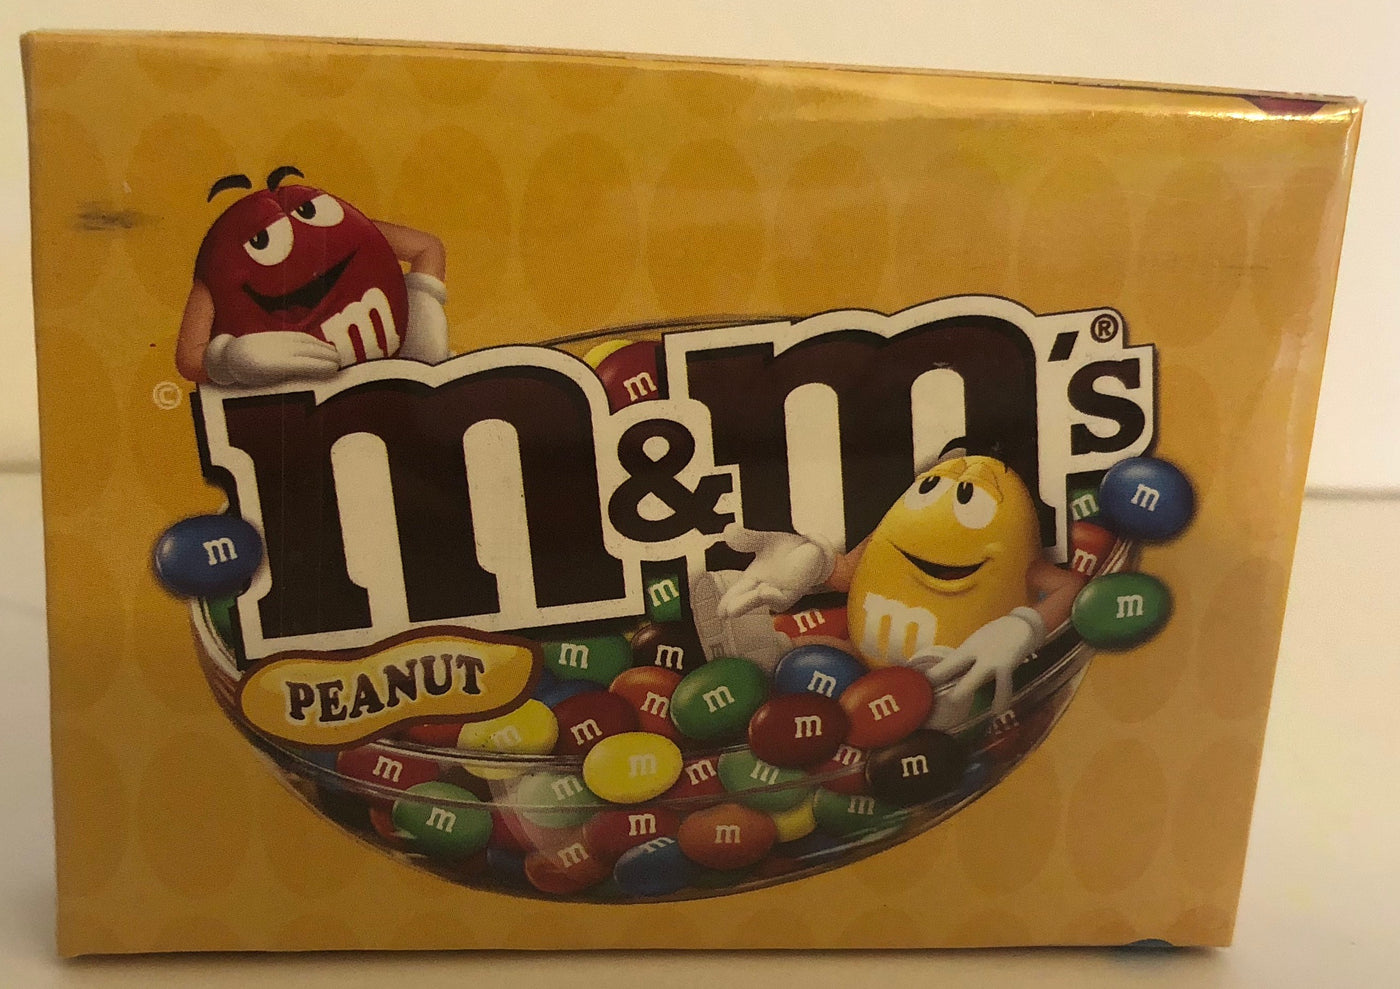 M&M's World Yellow and Red Peanut Playing Card New with Box Sealed